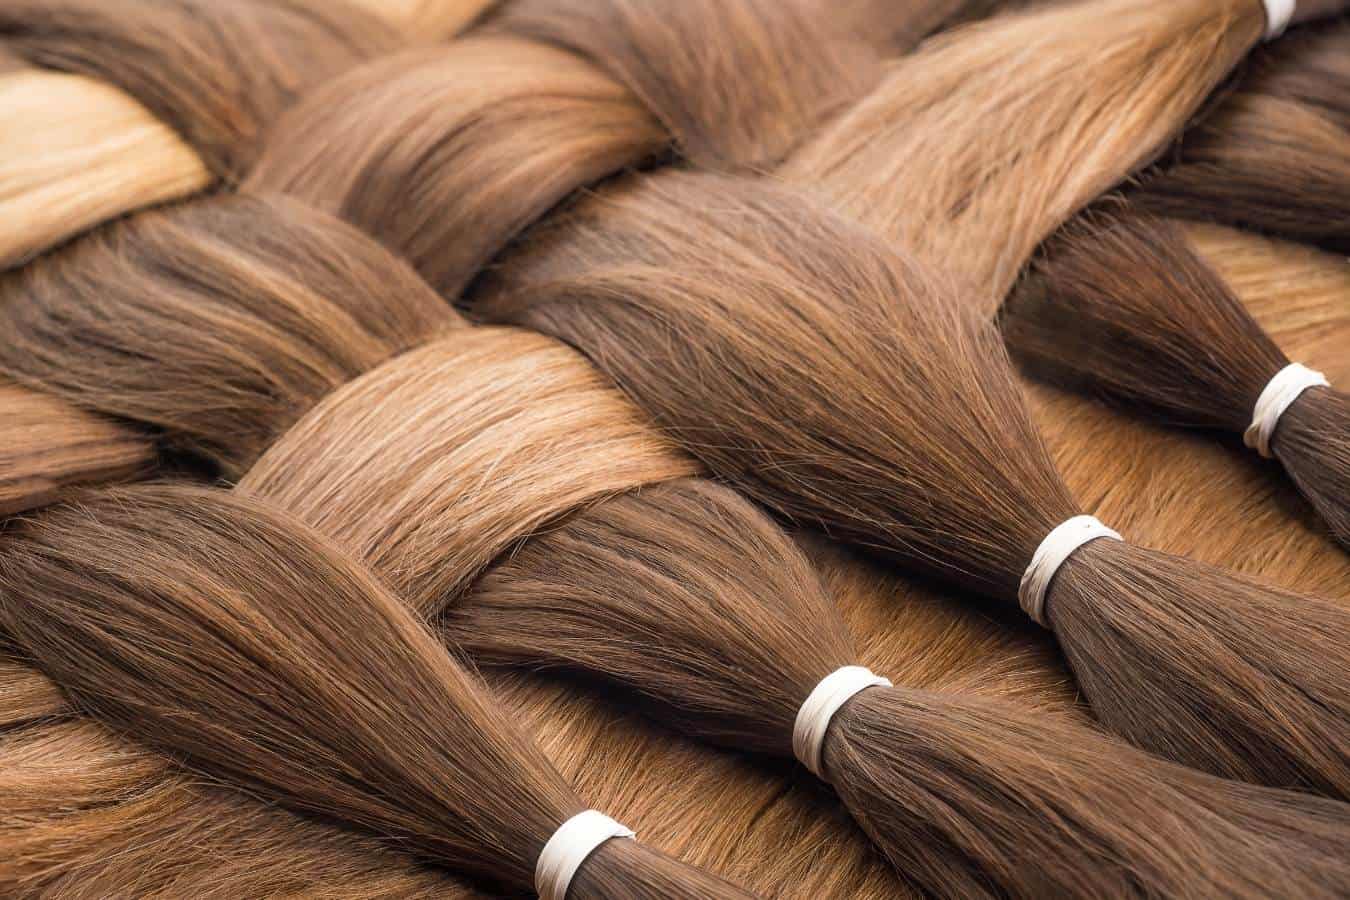 Does Biotin Change Your Hair Texture? What You Need To Know